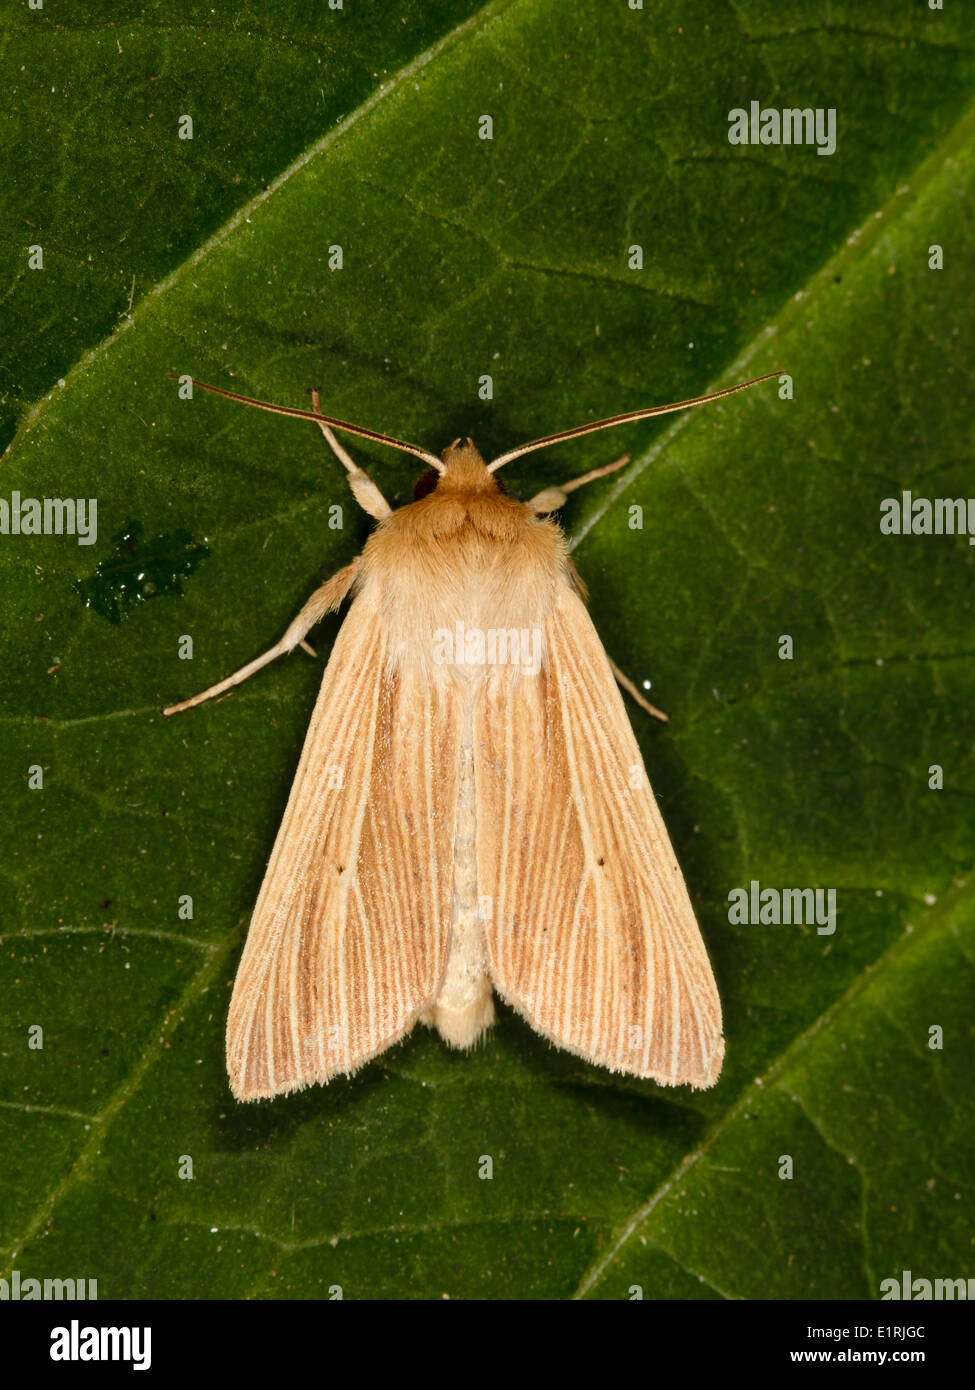 Common Wainscot (Mythimna pallens) resting on a green leaf. Stock Photo